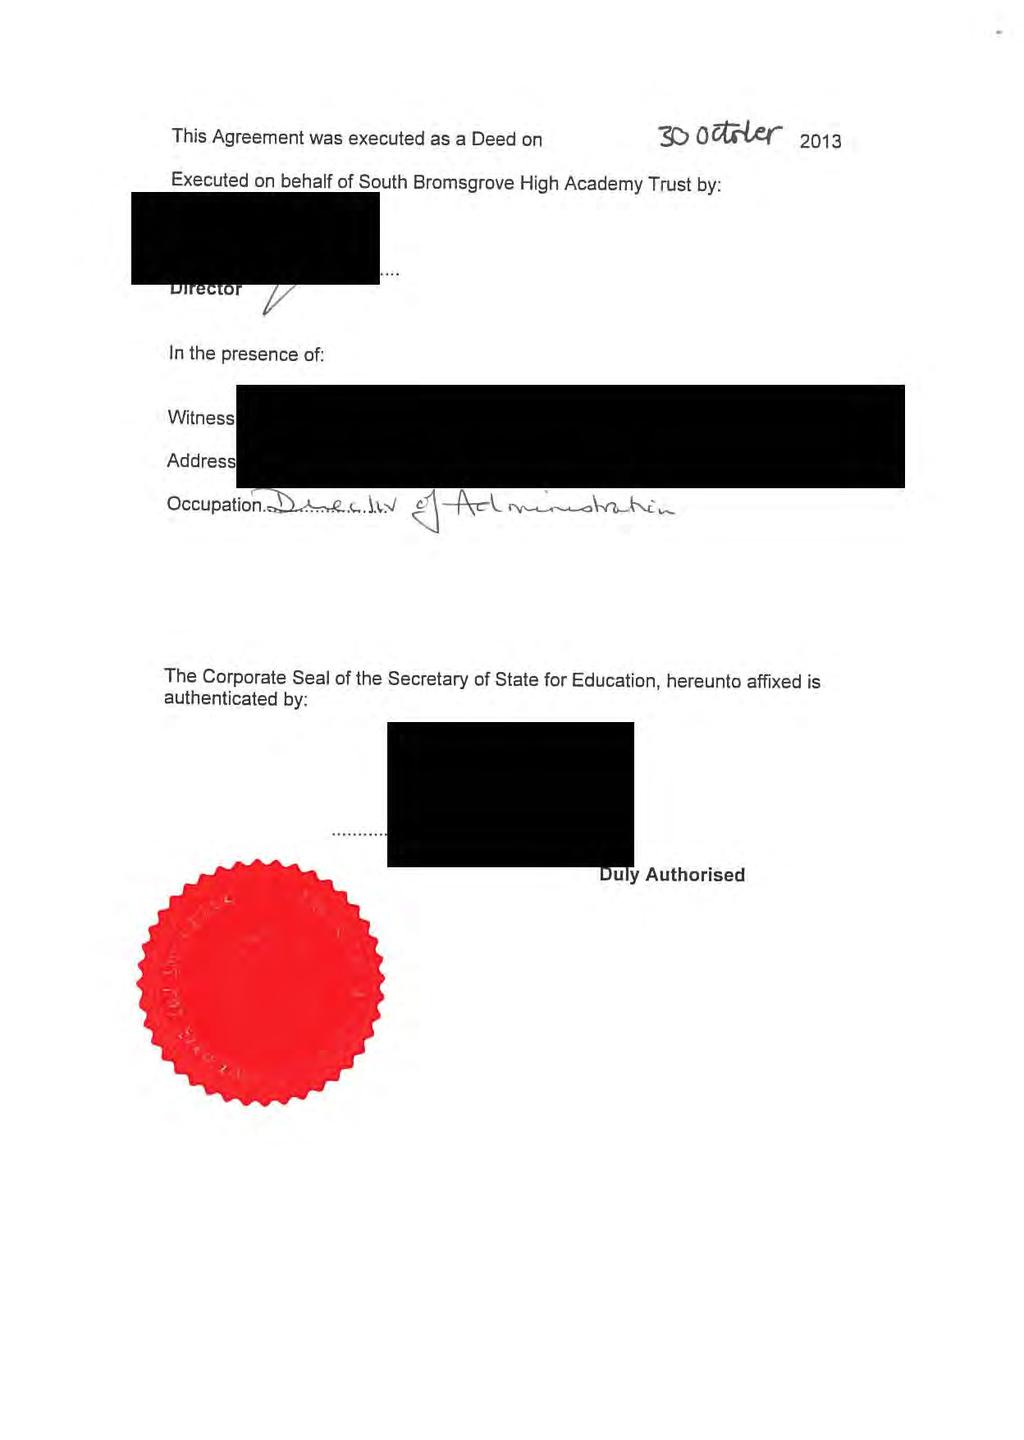 This Agreement was executed as a Deed on S~J oluier 2o13 Executed on behalf of South Bromsgrove High Academy Trust by: In the